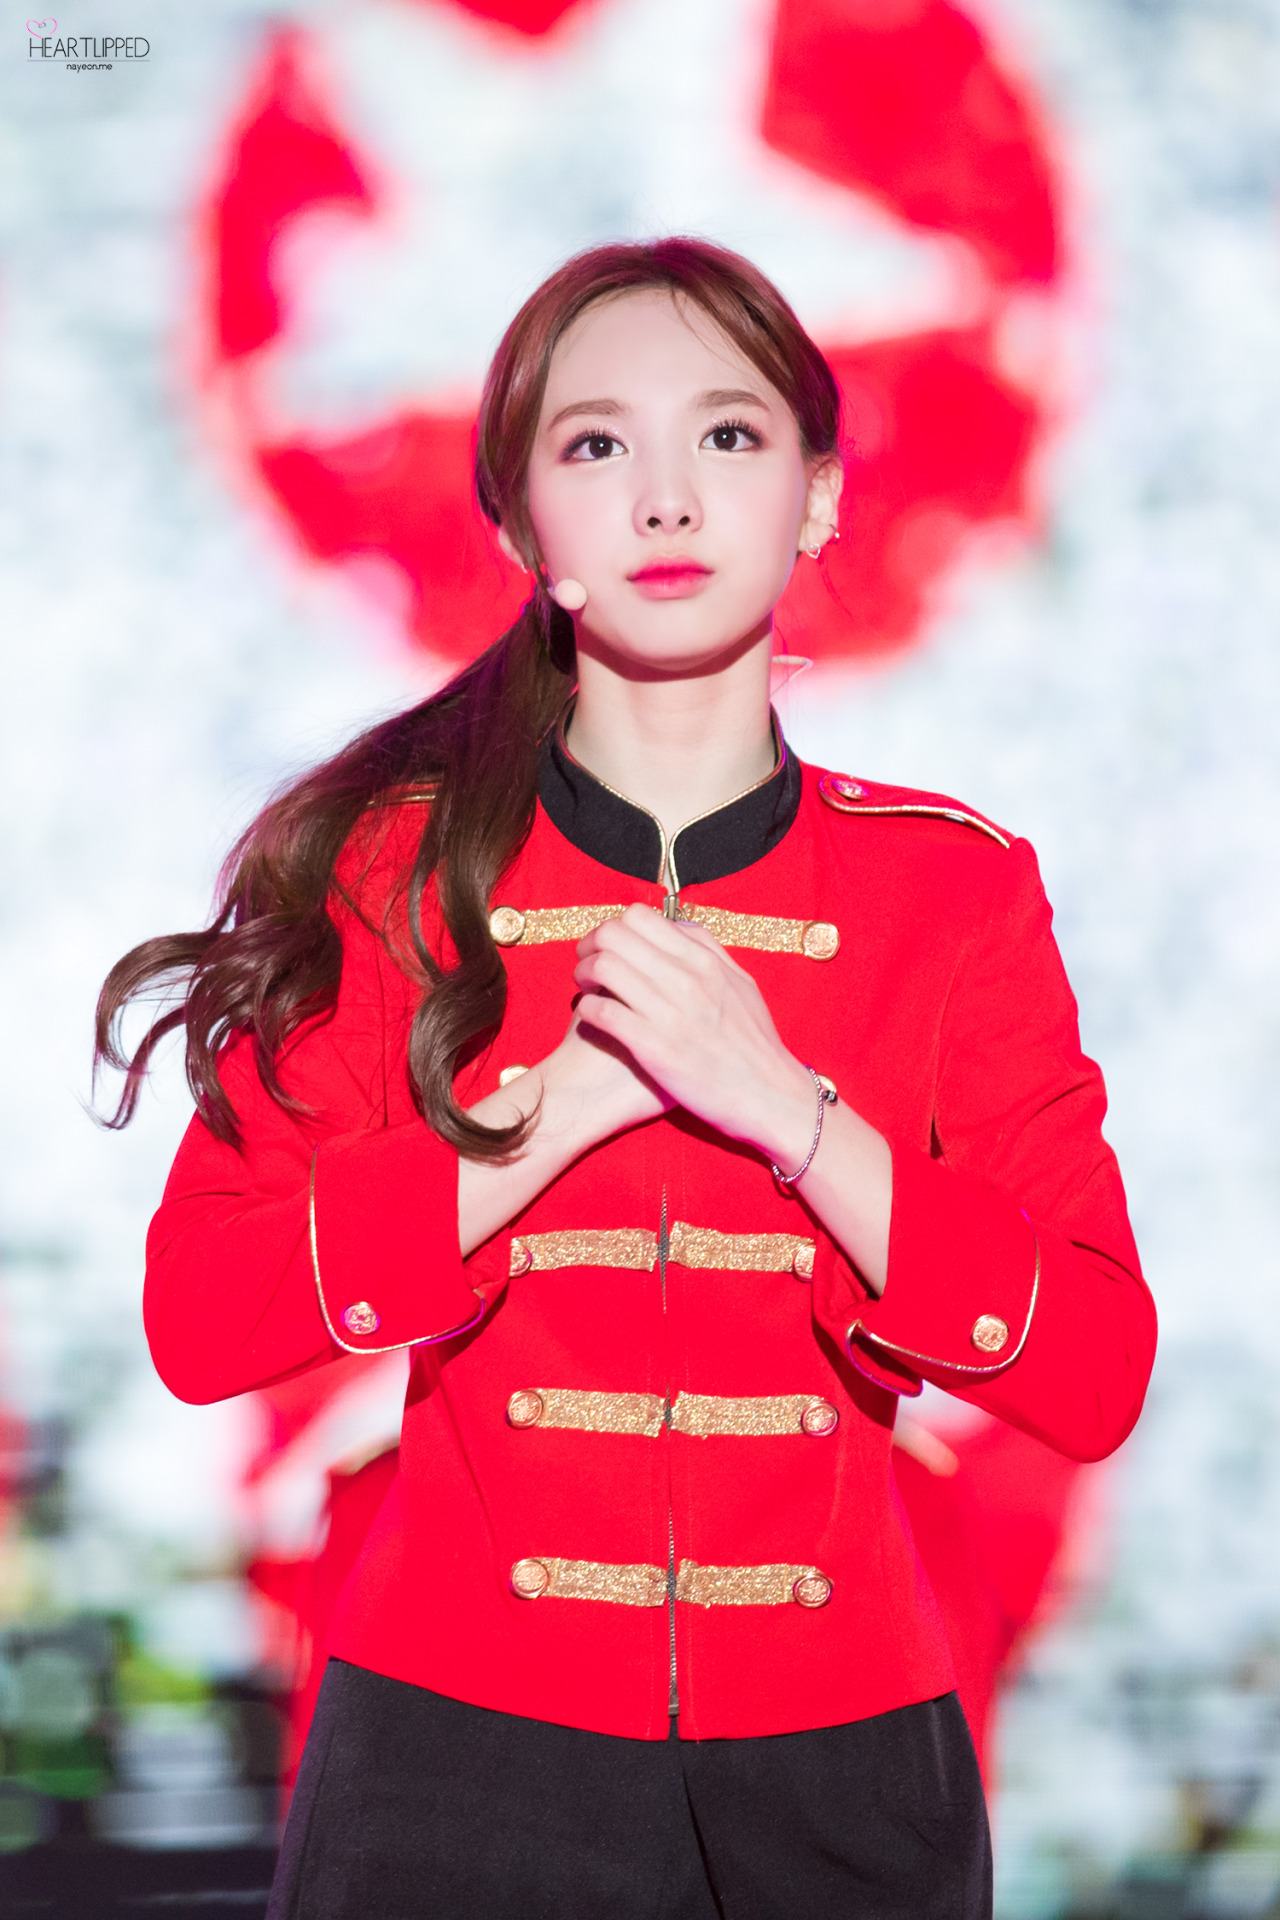 Is it Christmas yet or is it just Nayeon?